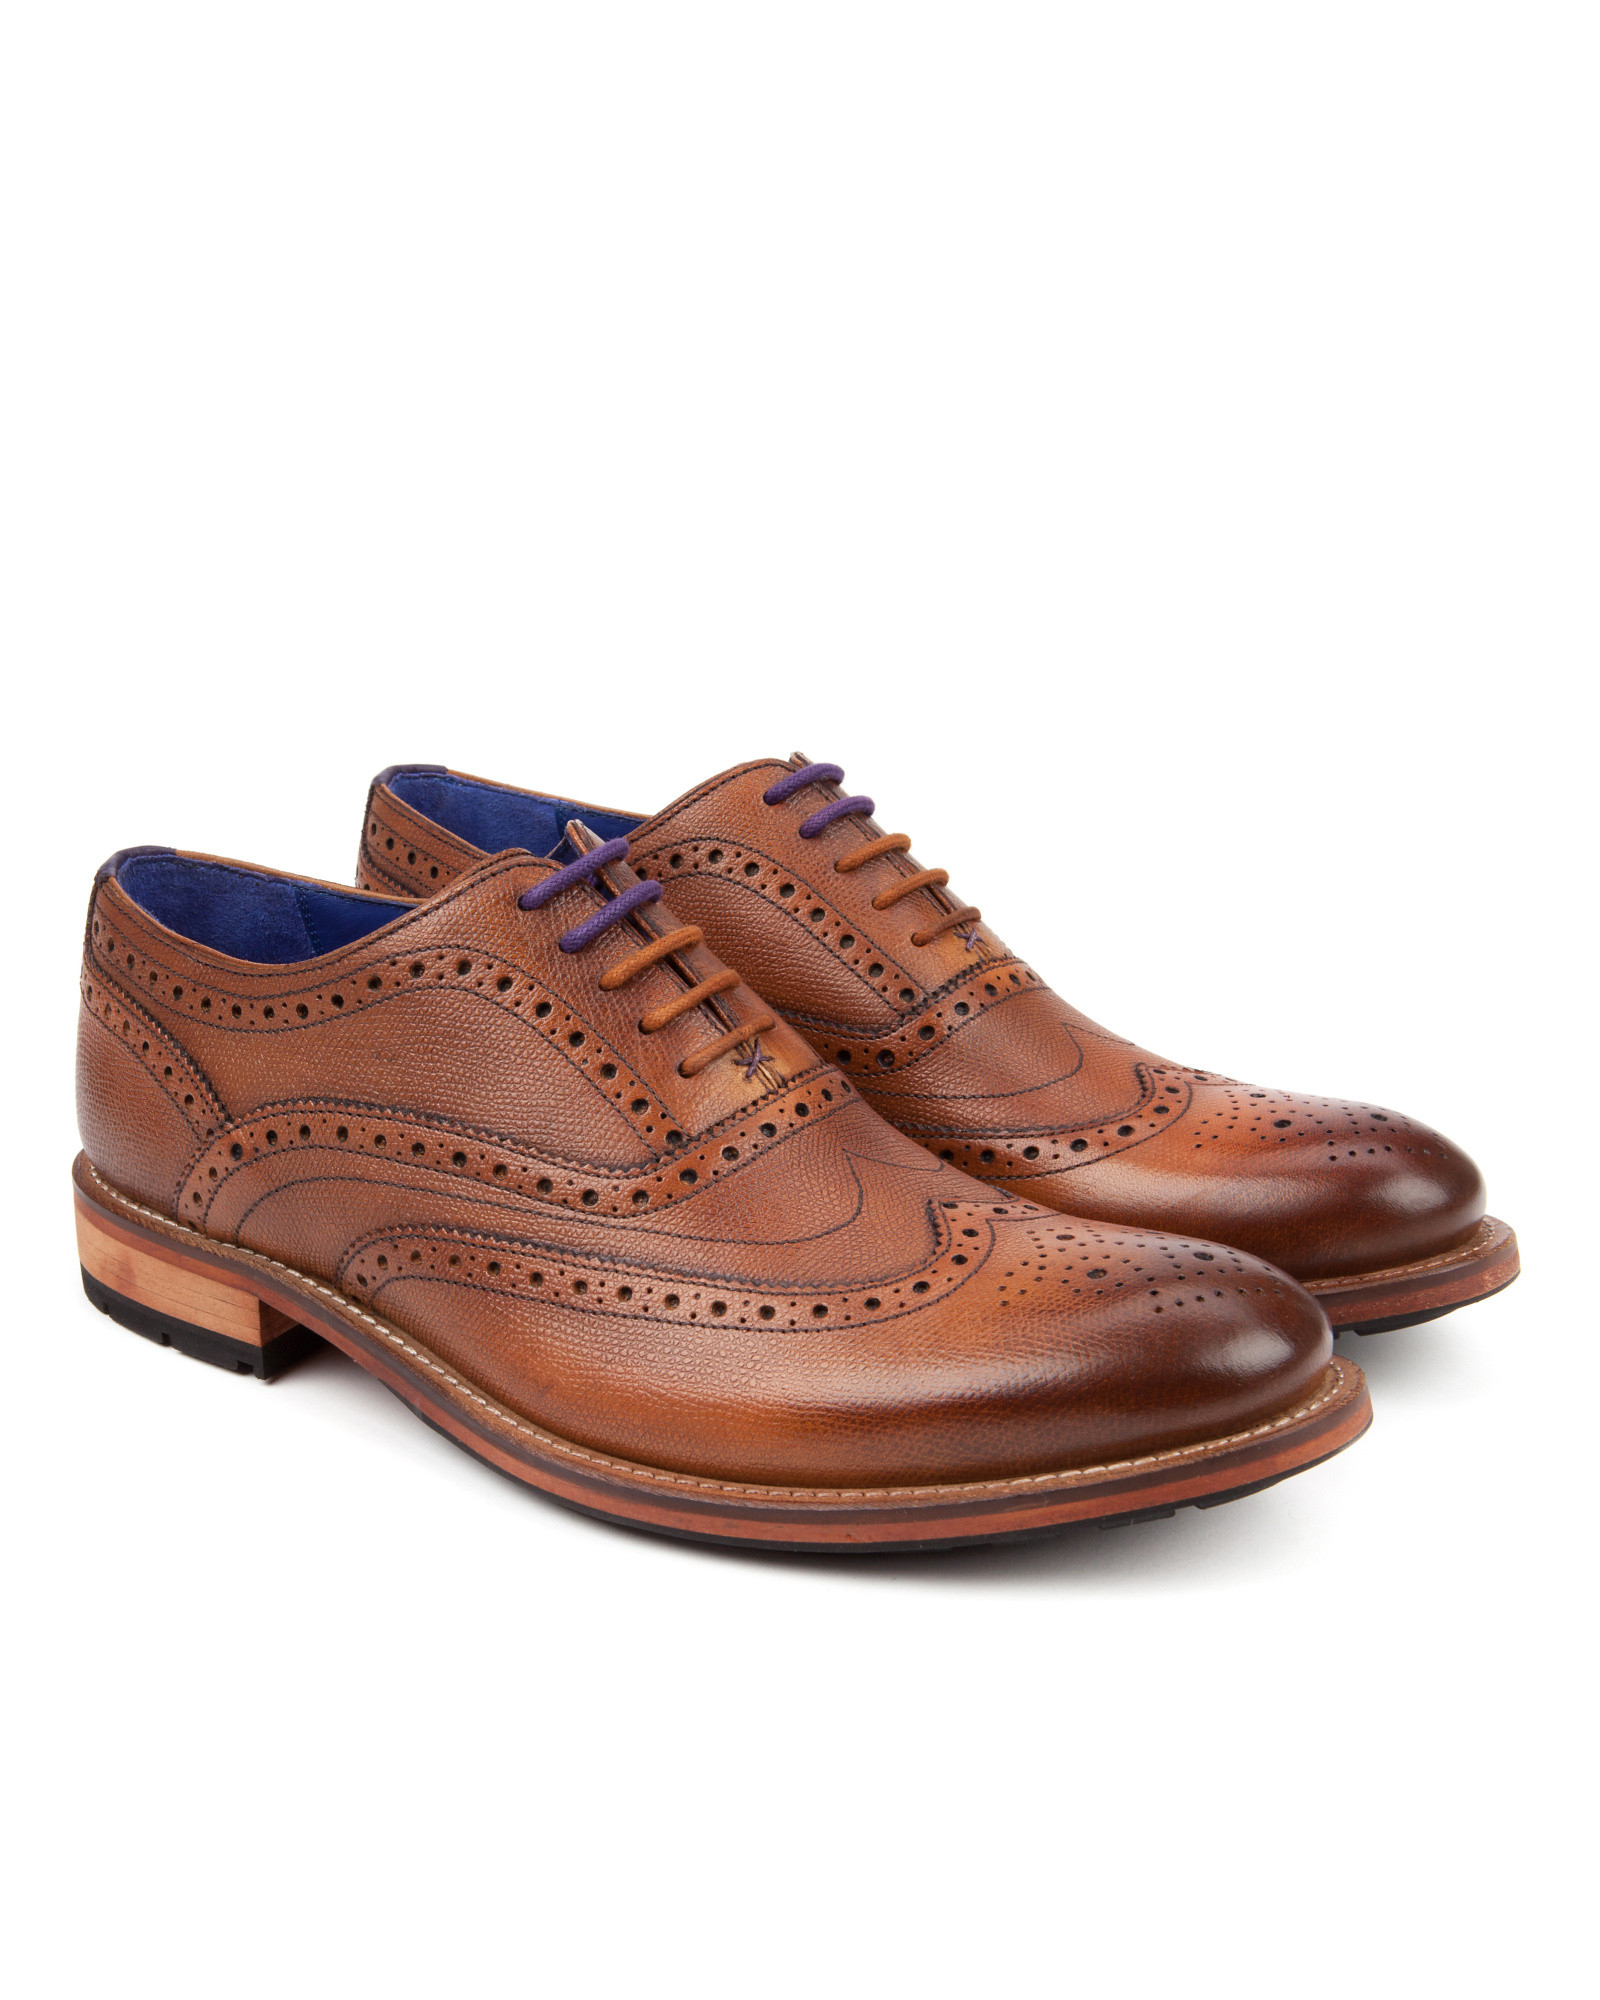 Ted Baker Oxford Brogue Shoe in Tan (Brown) for Men - Lyst